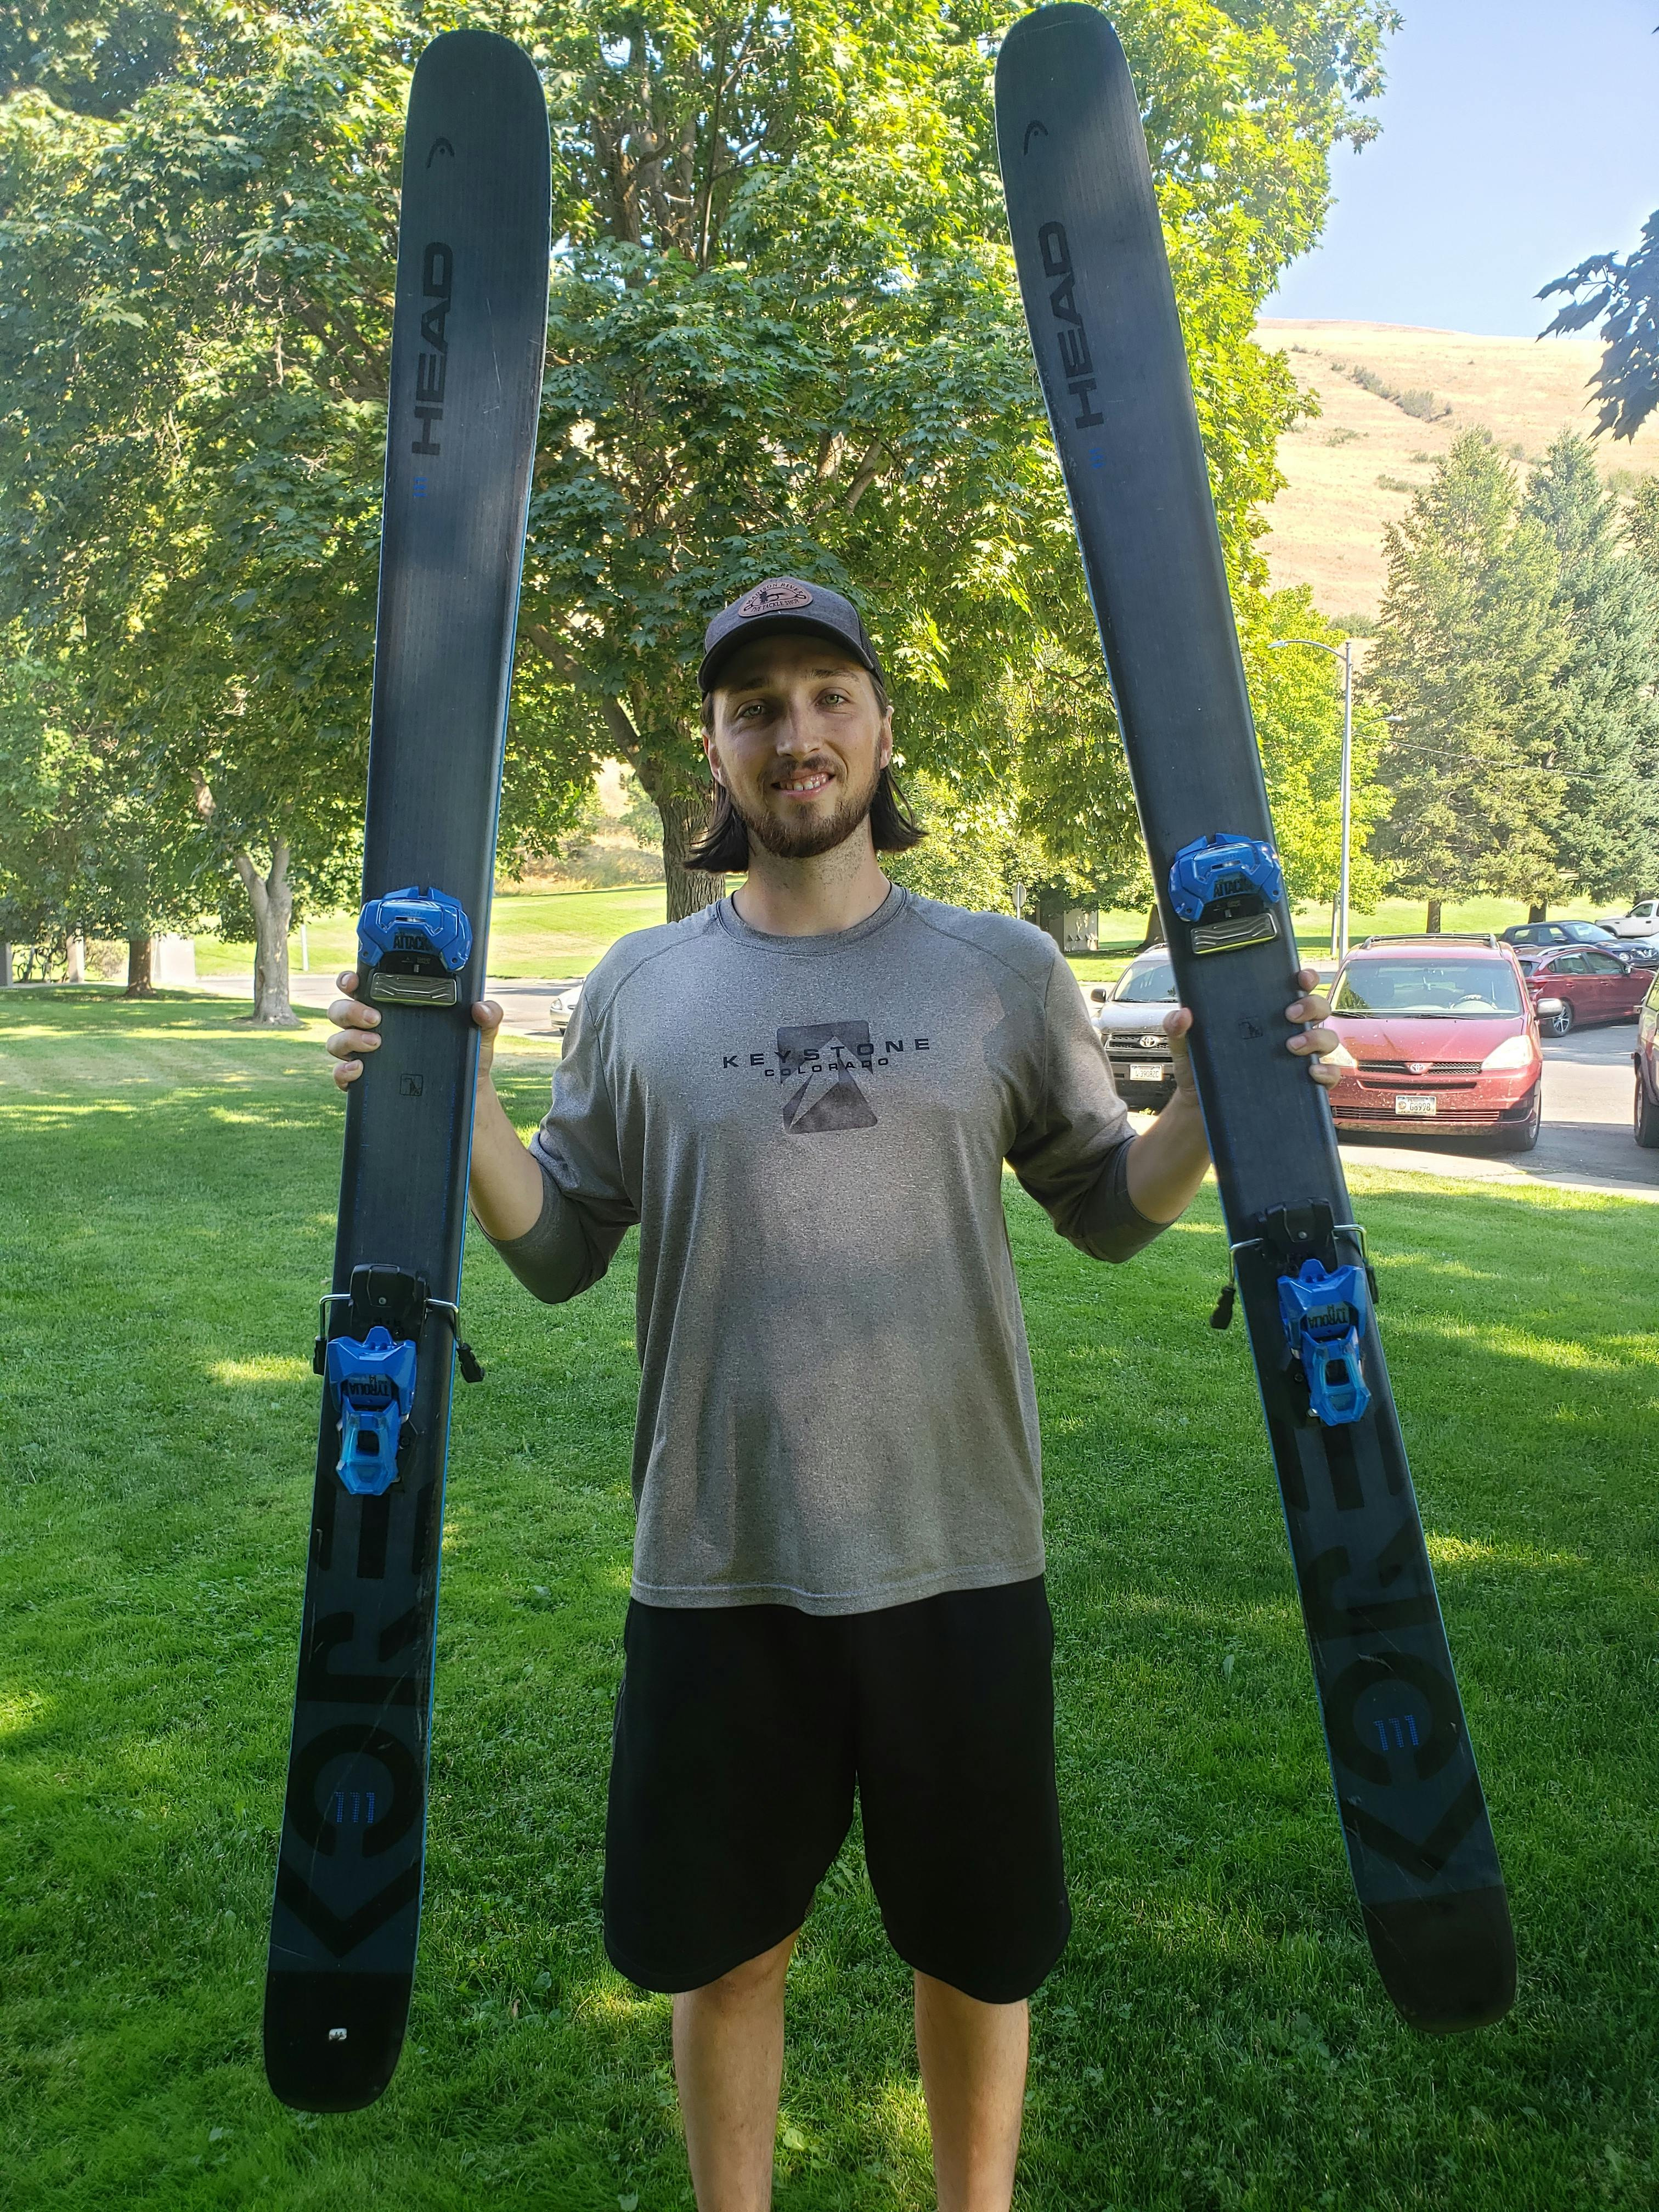 A man holding skis mounted with the Tyrolia Attack 14 Gw Ski Bindings.